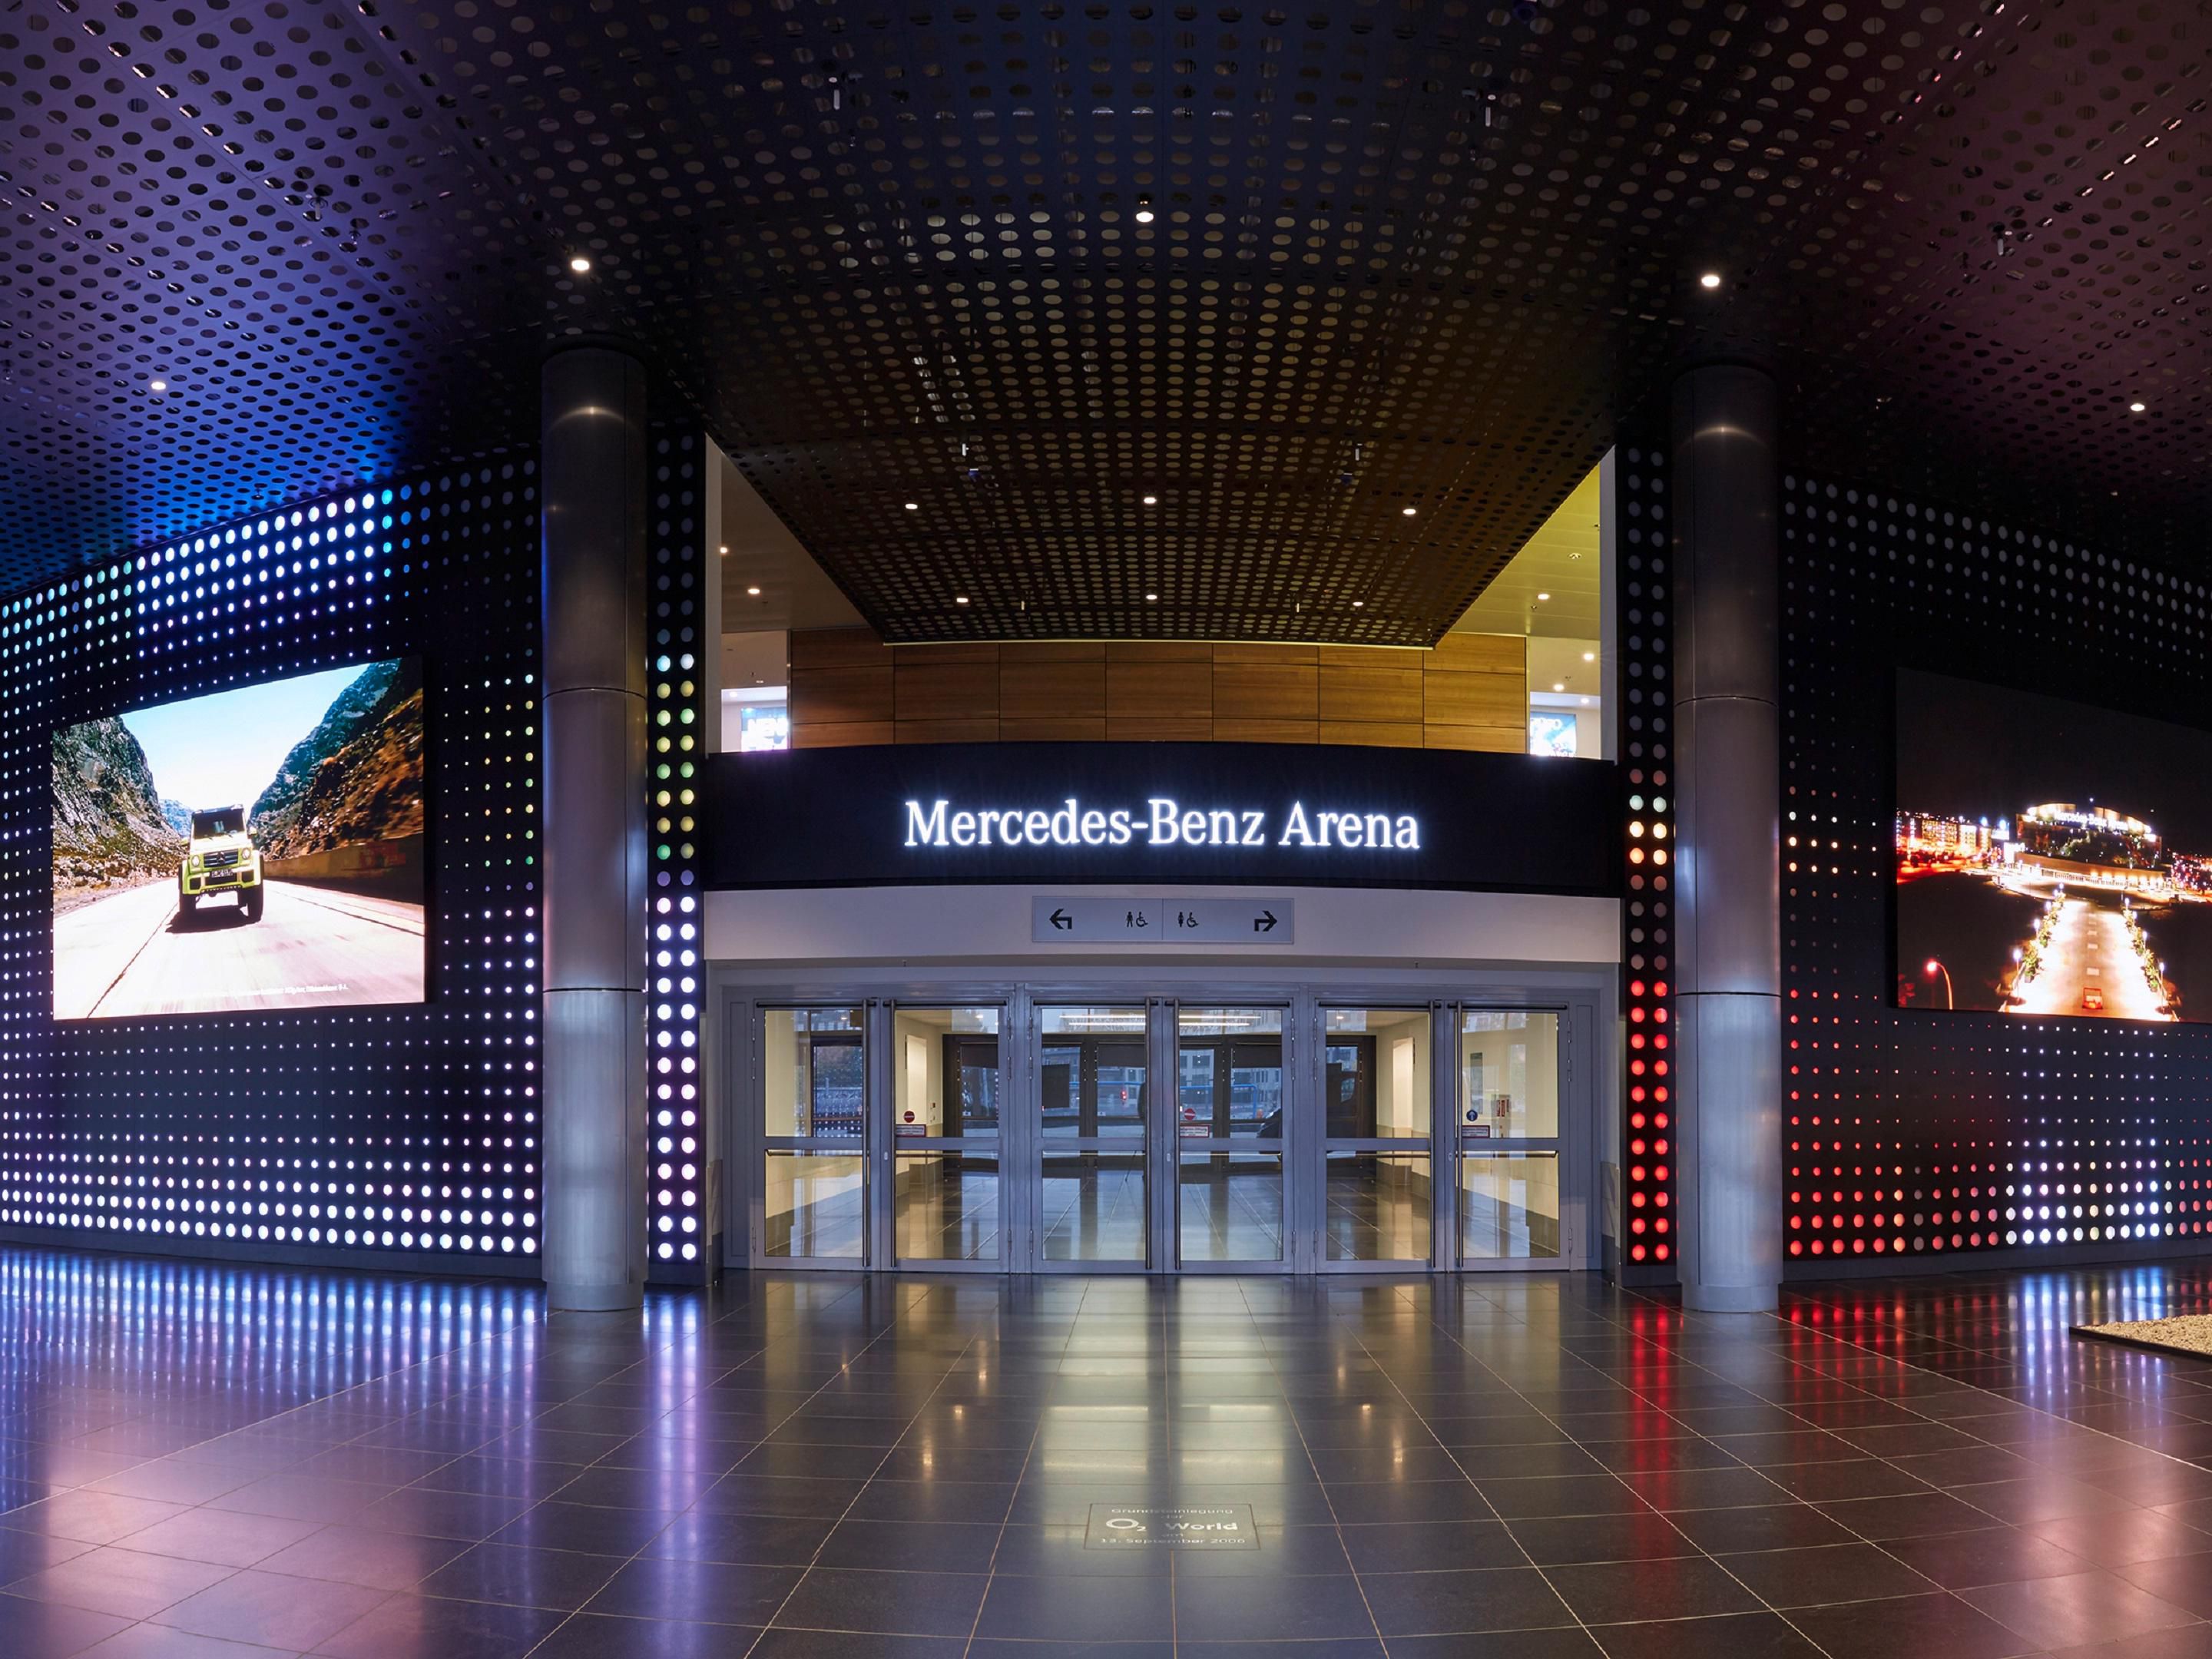 On the other side of the street, you will find the Mercedes-Benz Arena. Visit concerts of international top artists, big e-sport events or games of Alba Berlin and the Eisbären Berlin.